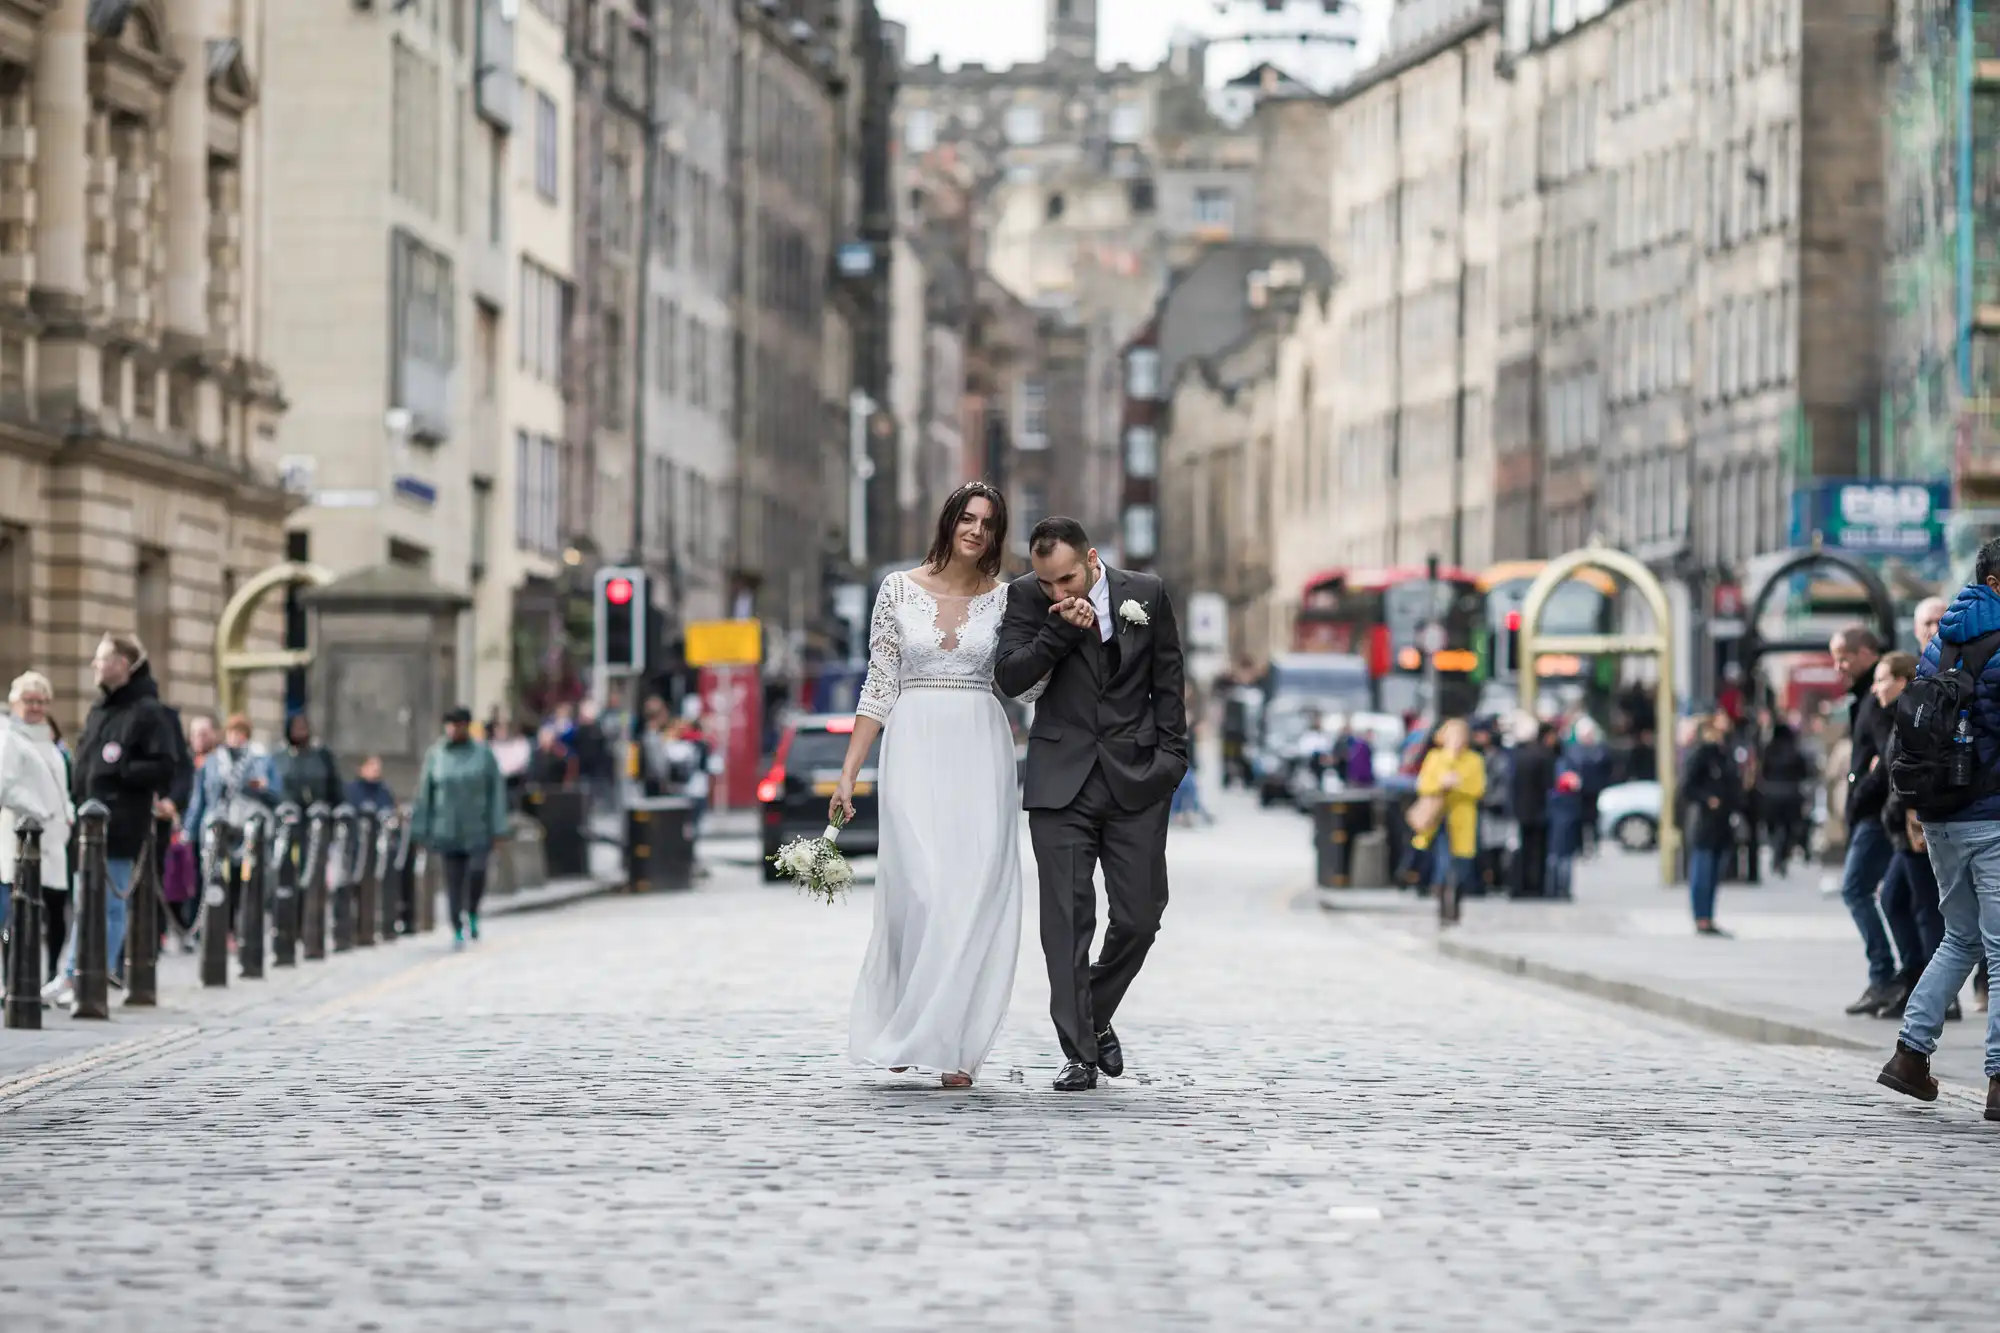 A bride and groom walk arm-in-arm down a cobblestone street in a city surrounded by buildings and people.